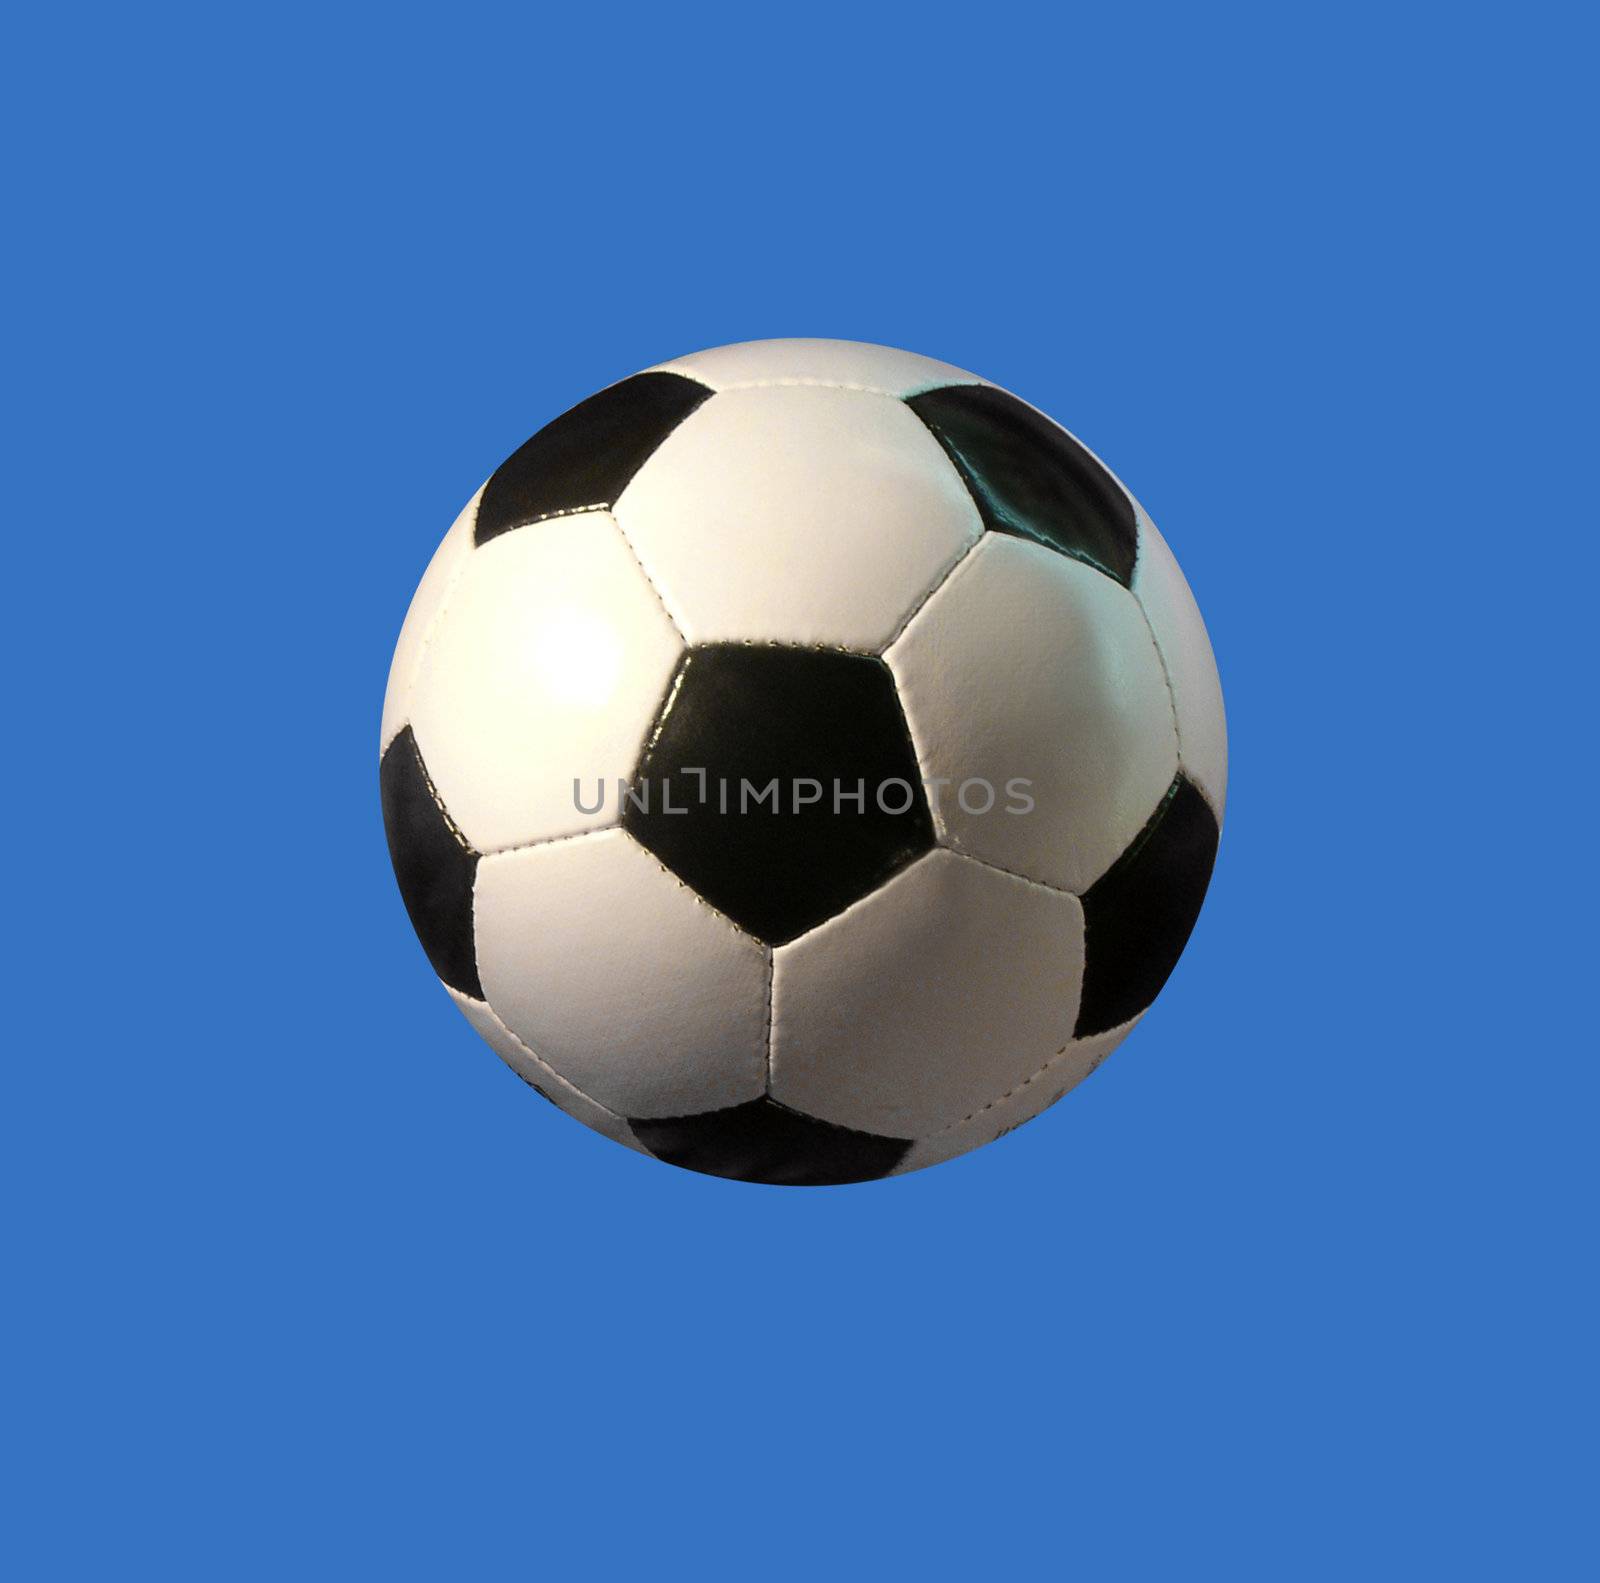 A simple soccer ball in front of clear blue background.